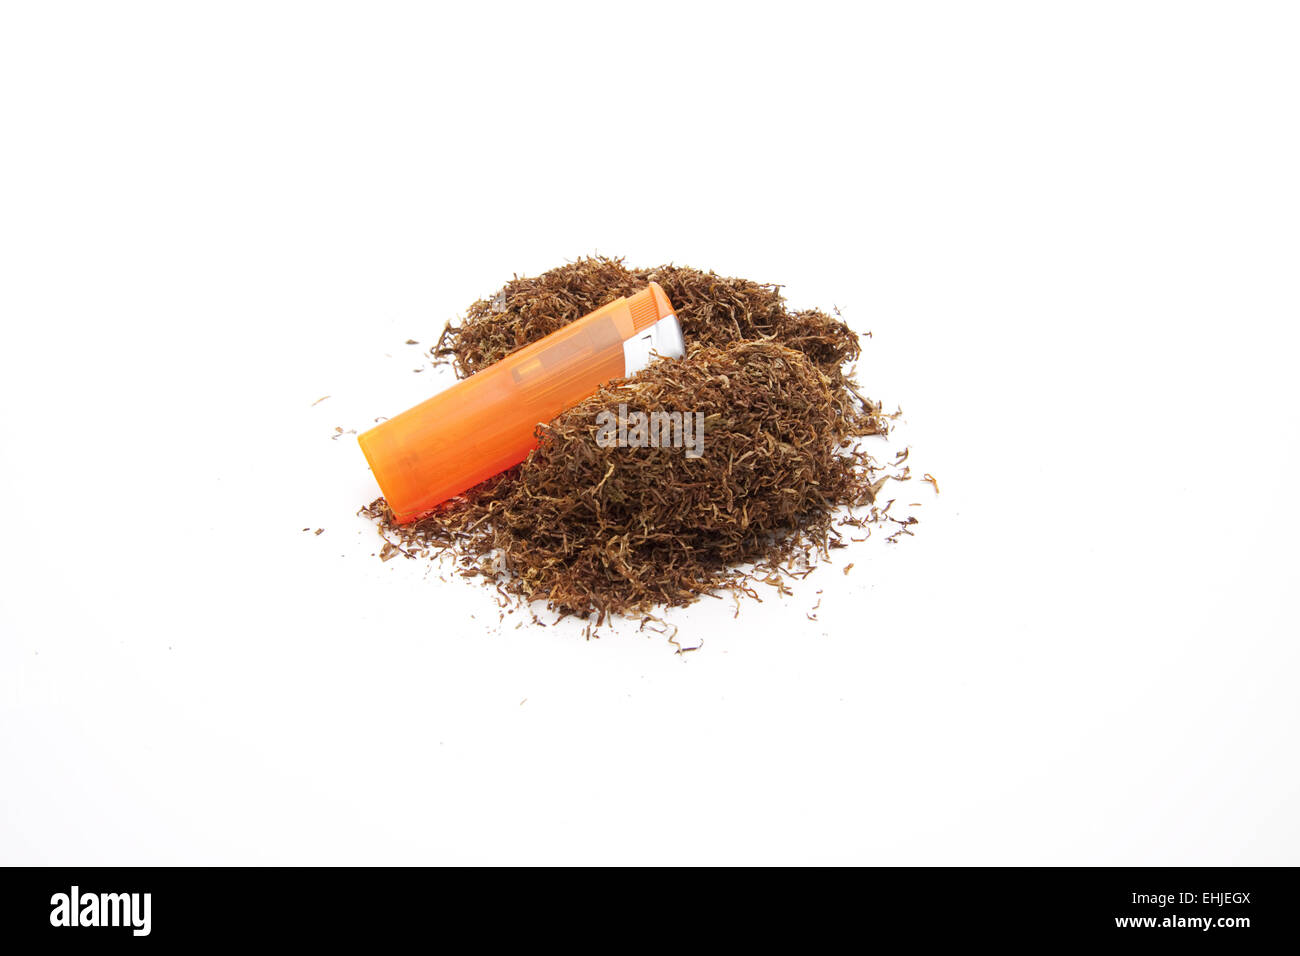 Darning tobacco and lighter Stock Photo